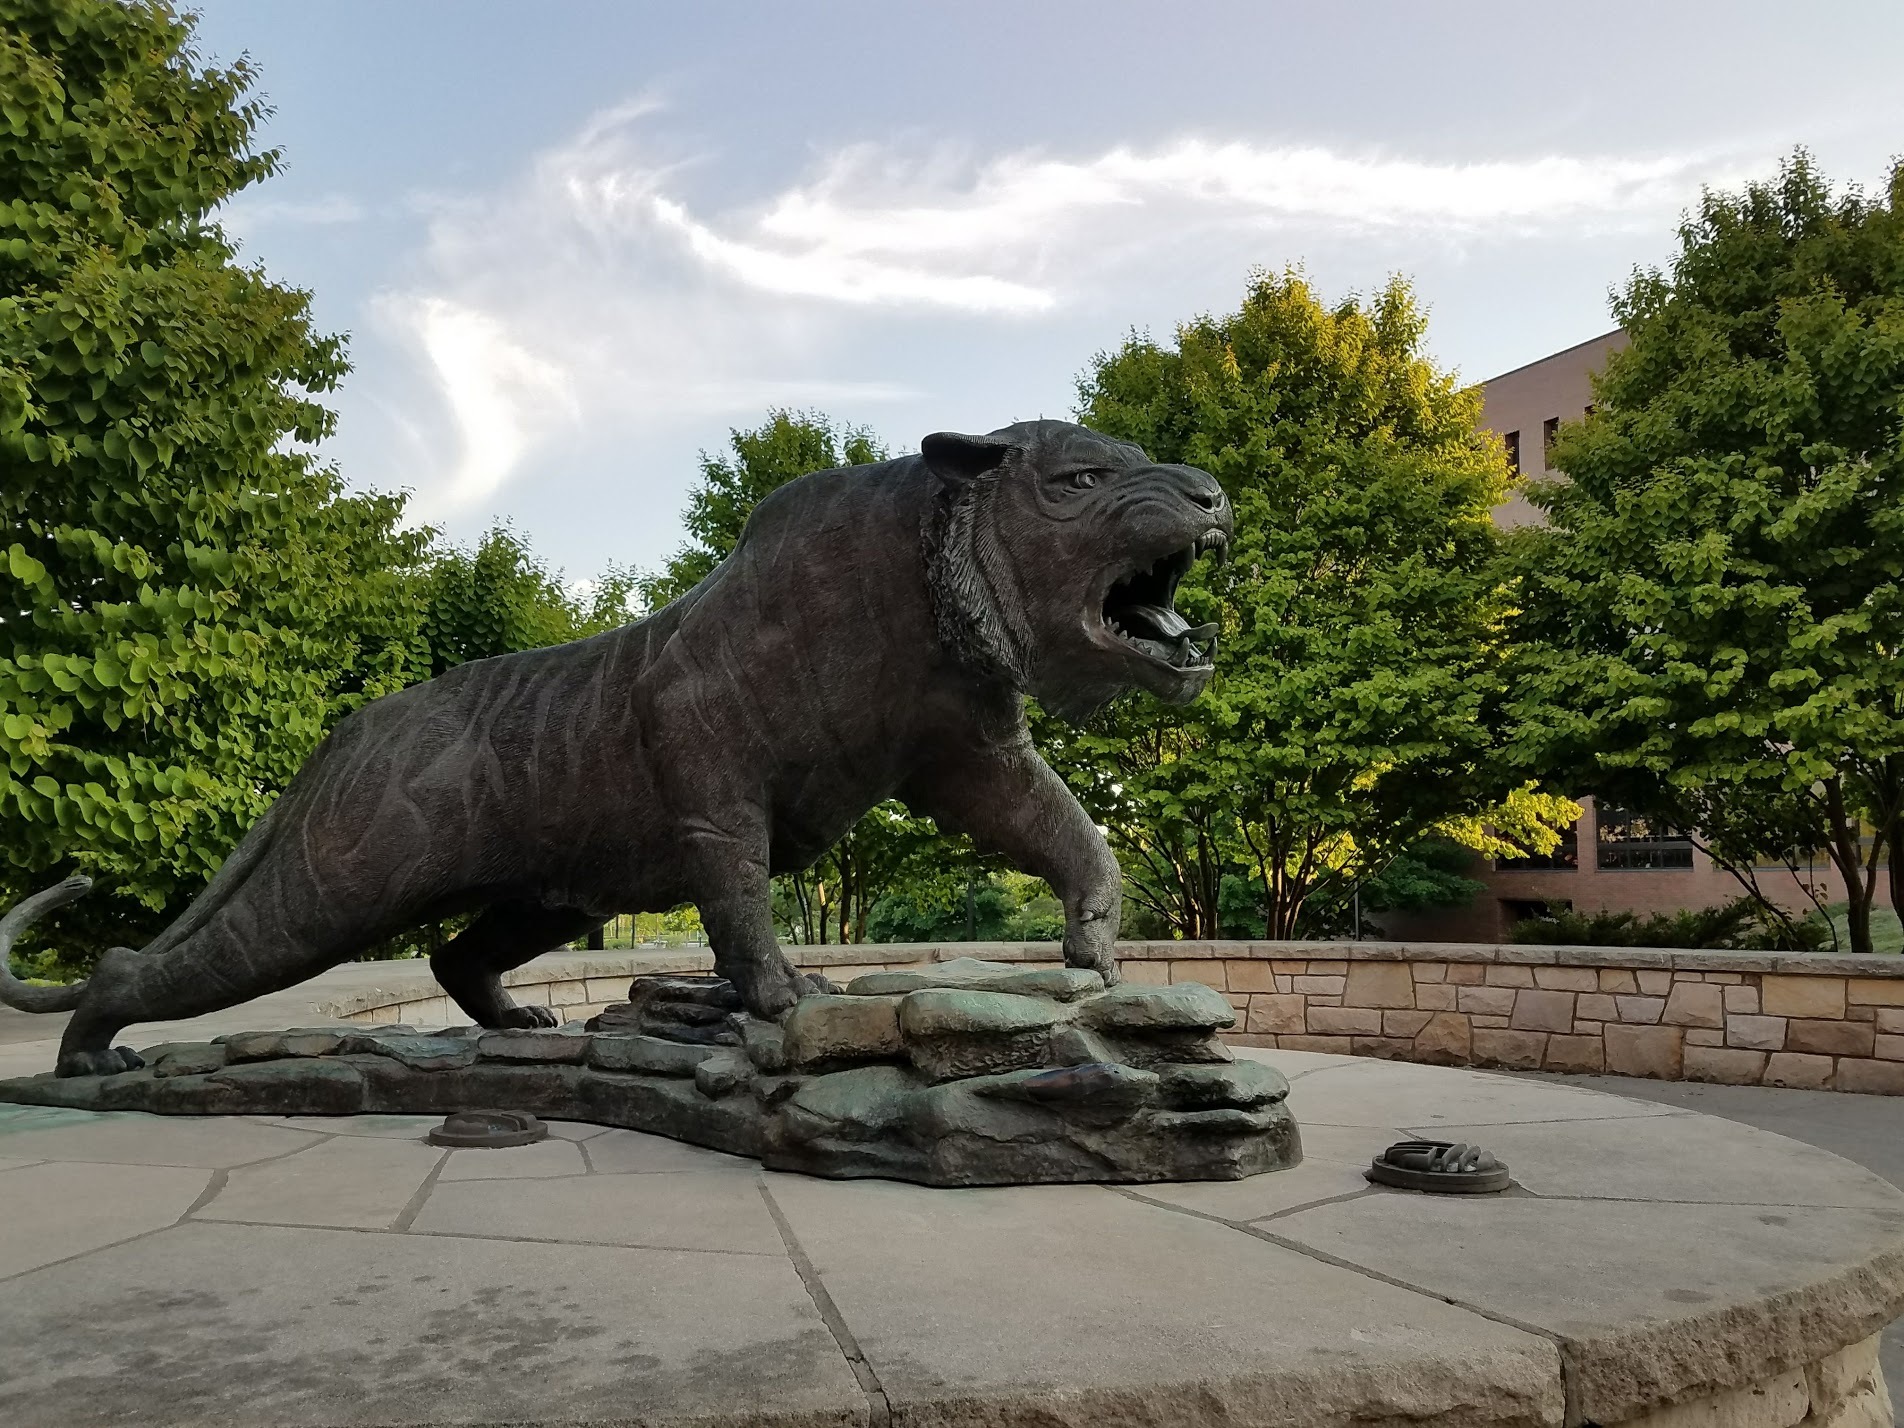 RIT Tiger during the summer